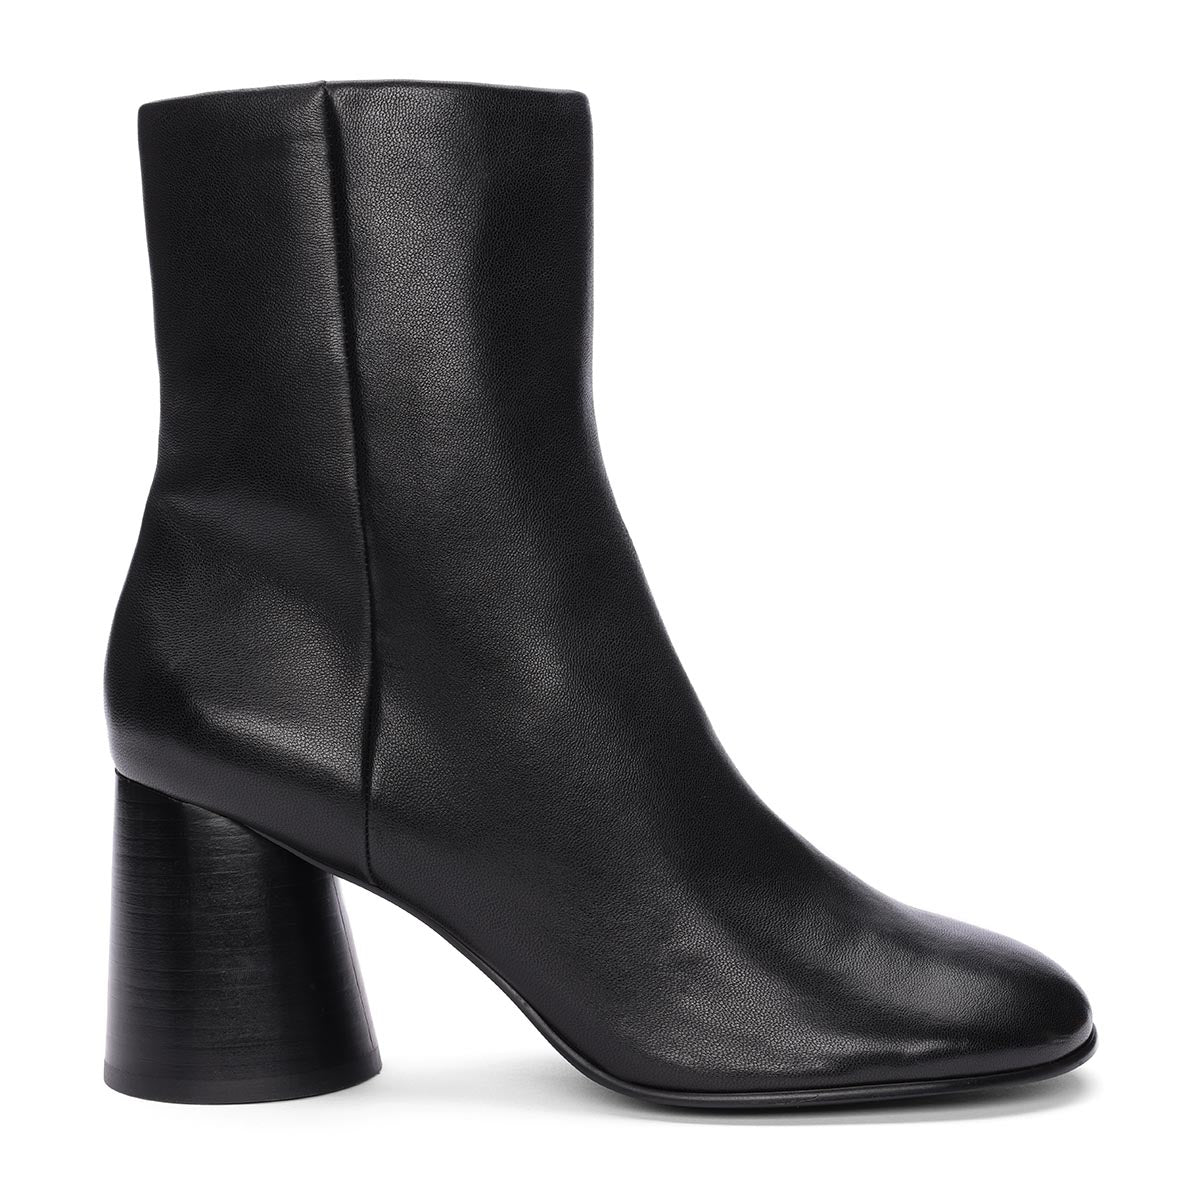 Clone Dress Booties - Black - Dress Ankle Boots - Side View - ASH